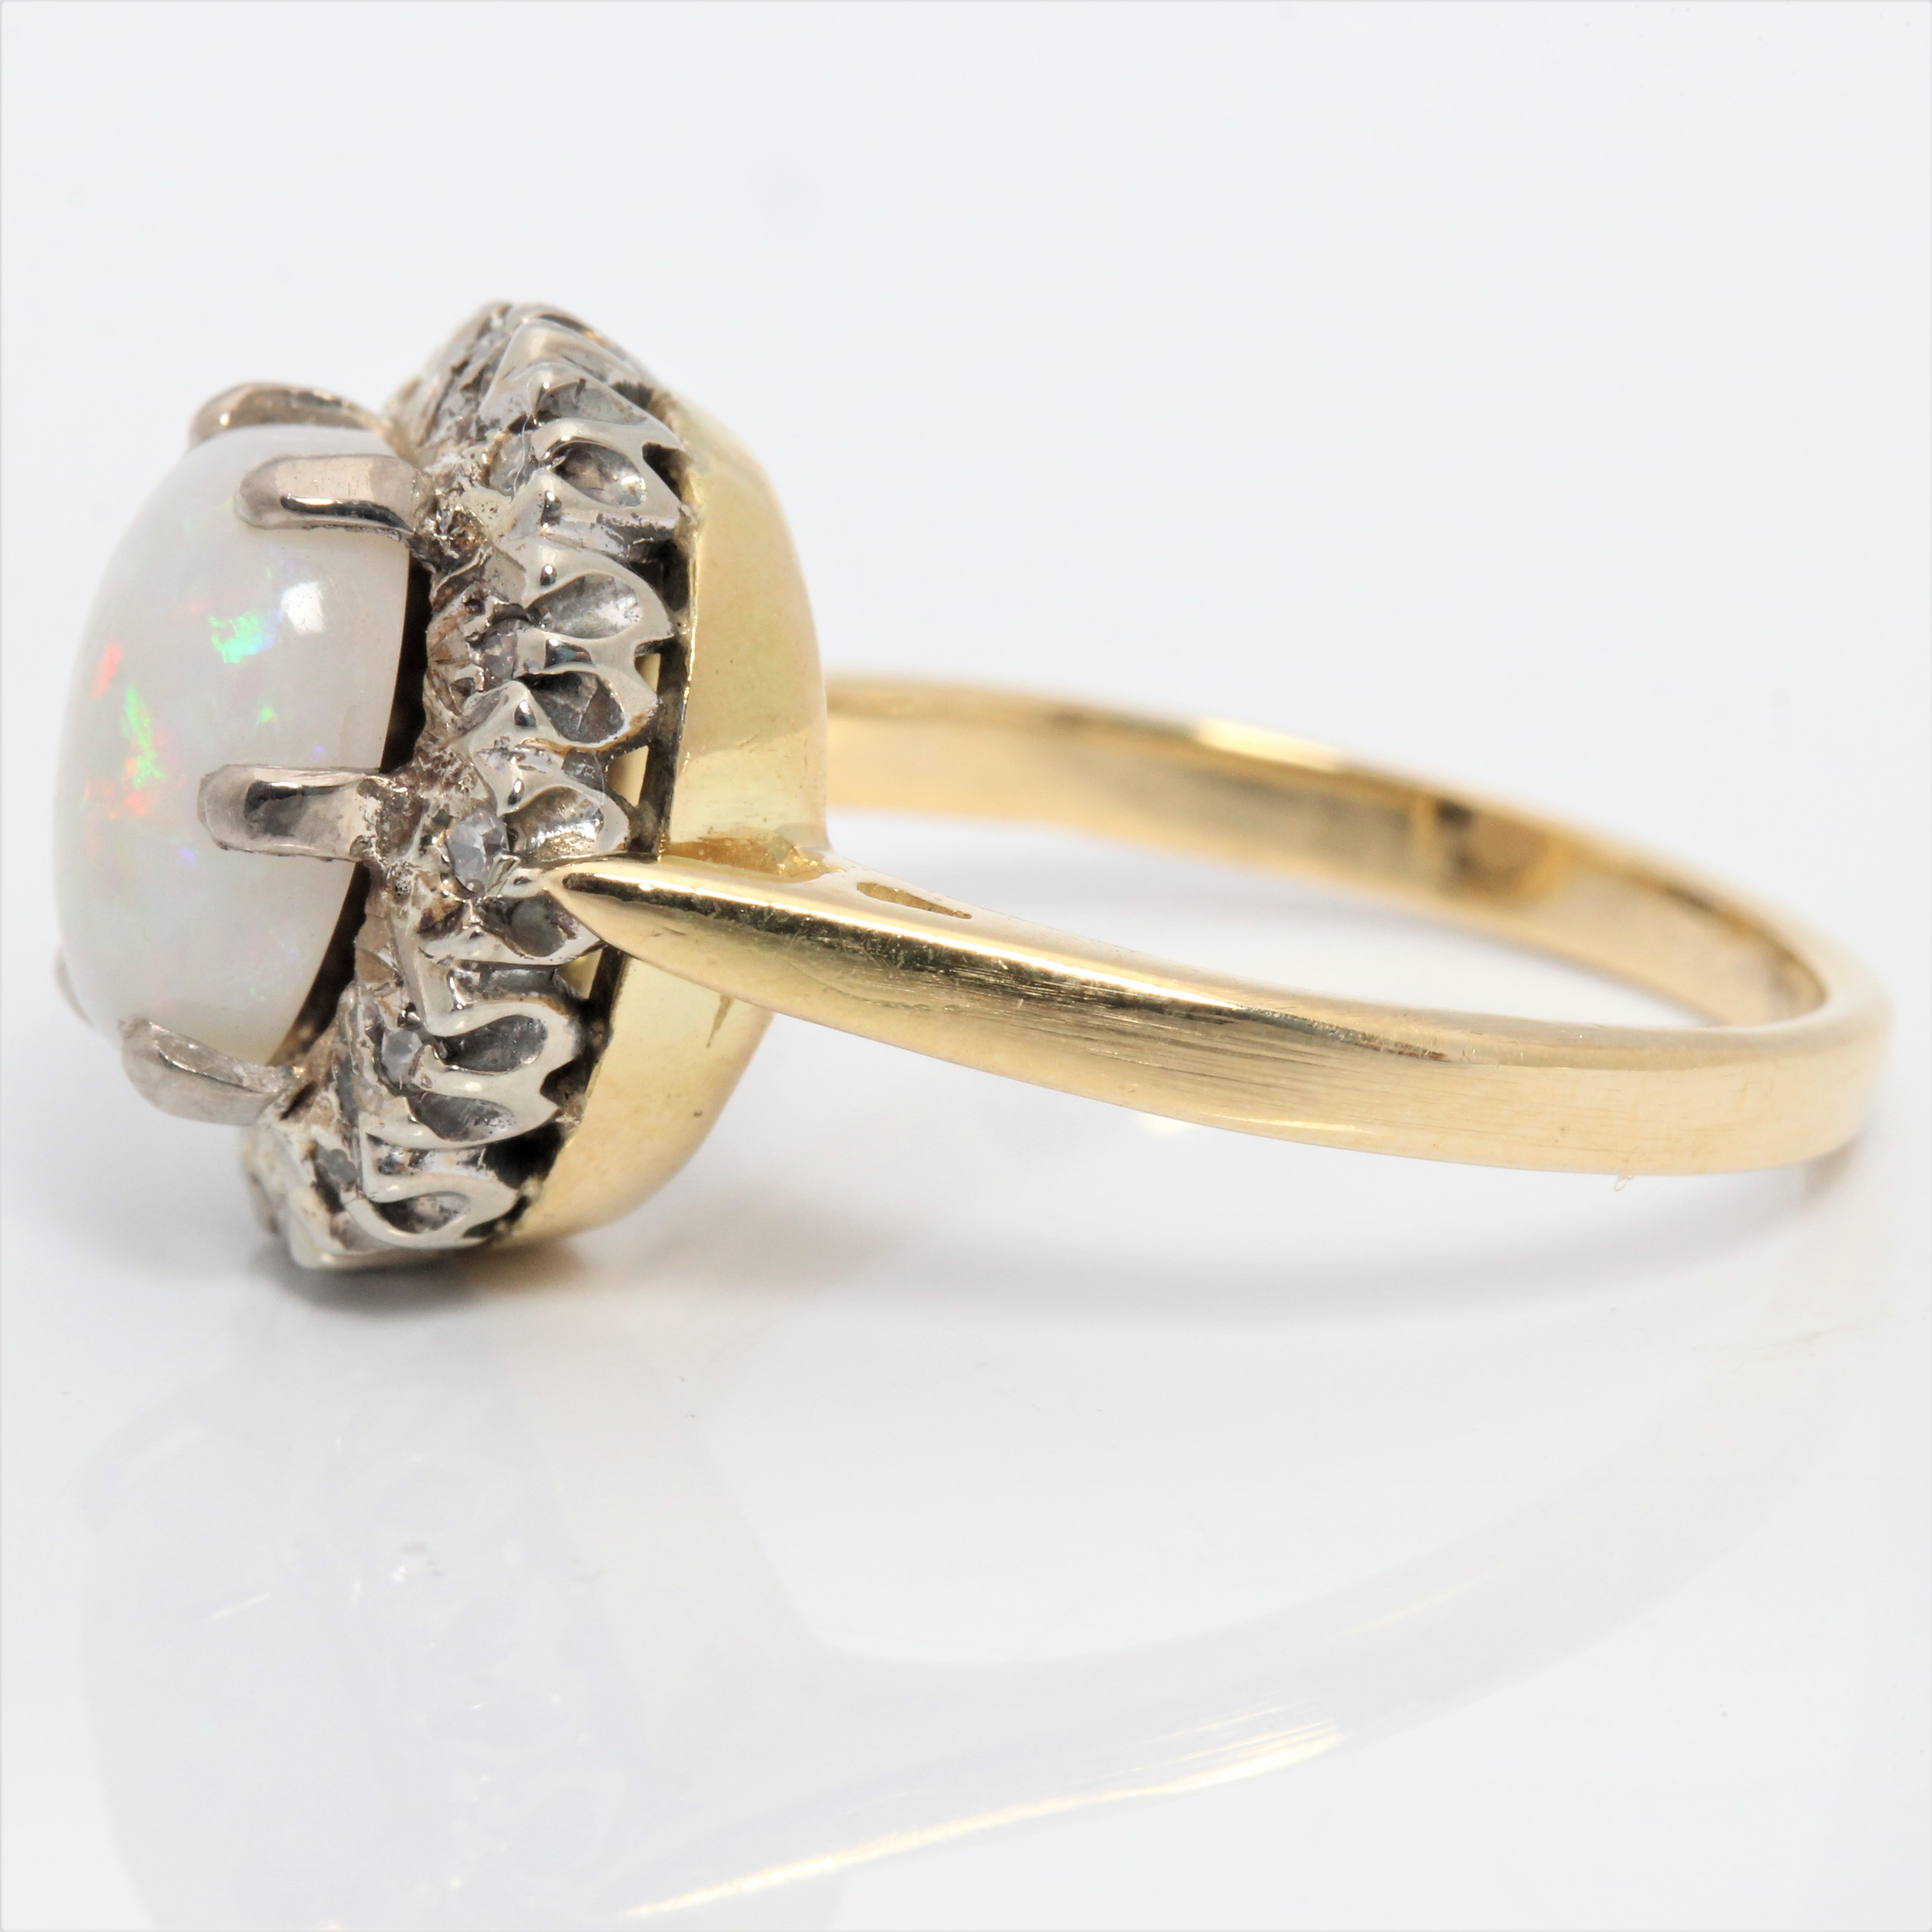 An opal and diamond cluster ring, set with an oval opal cabochon, measuring approx. 9x6mm, - Image 4 of 4